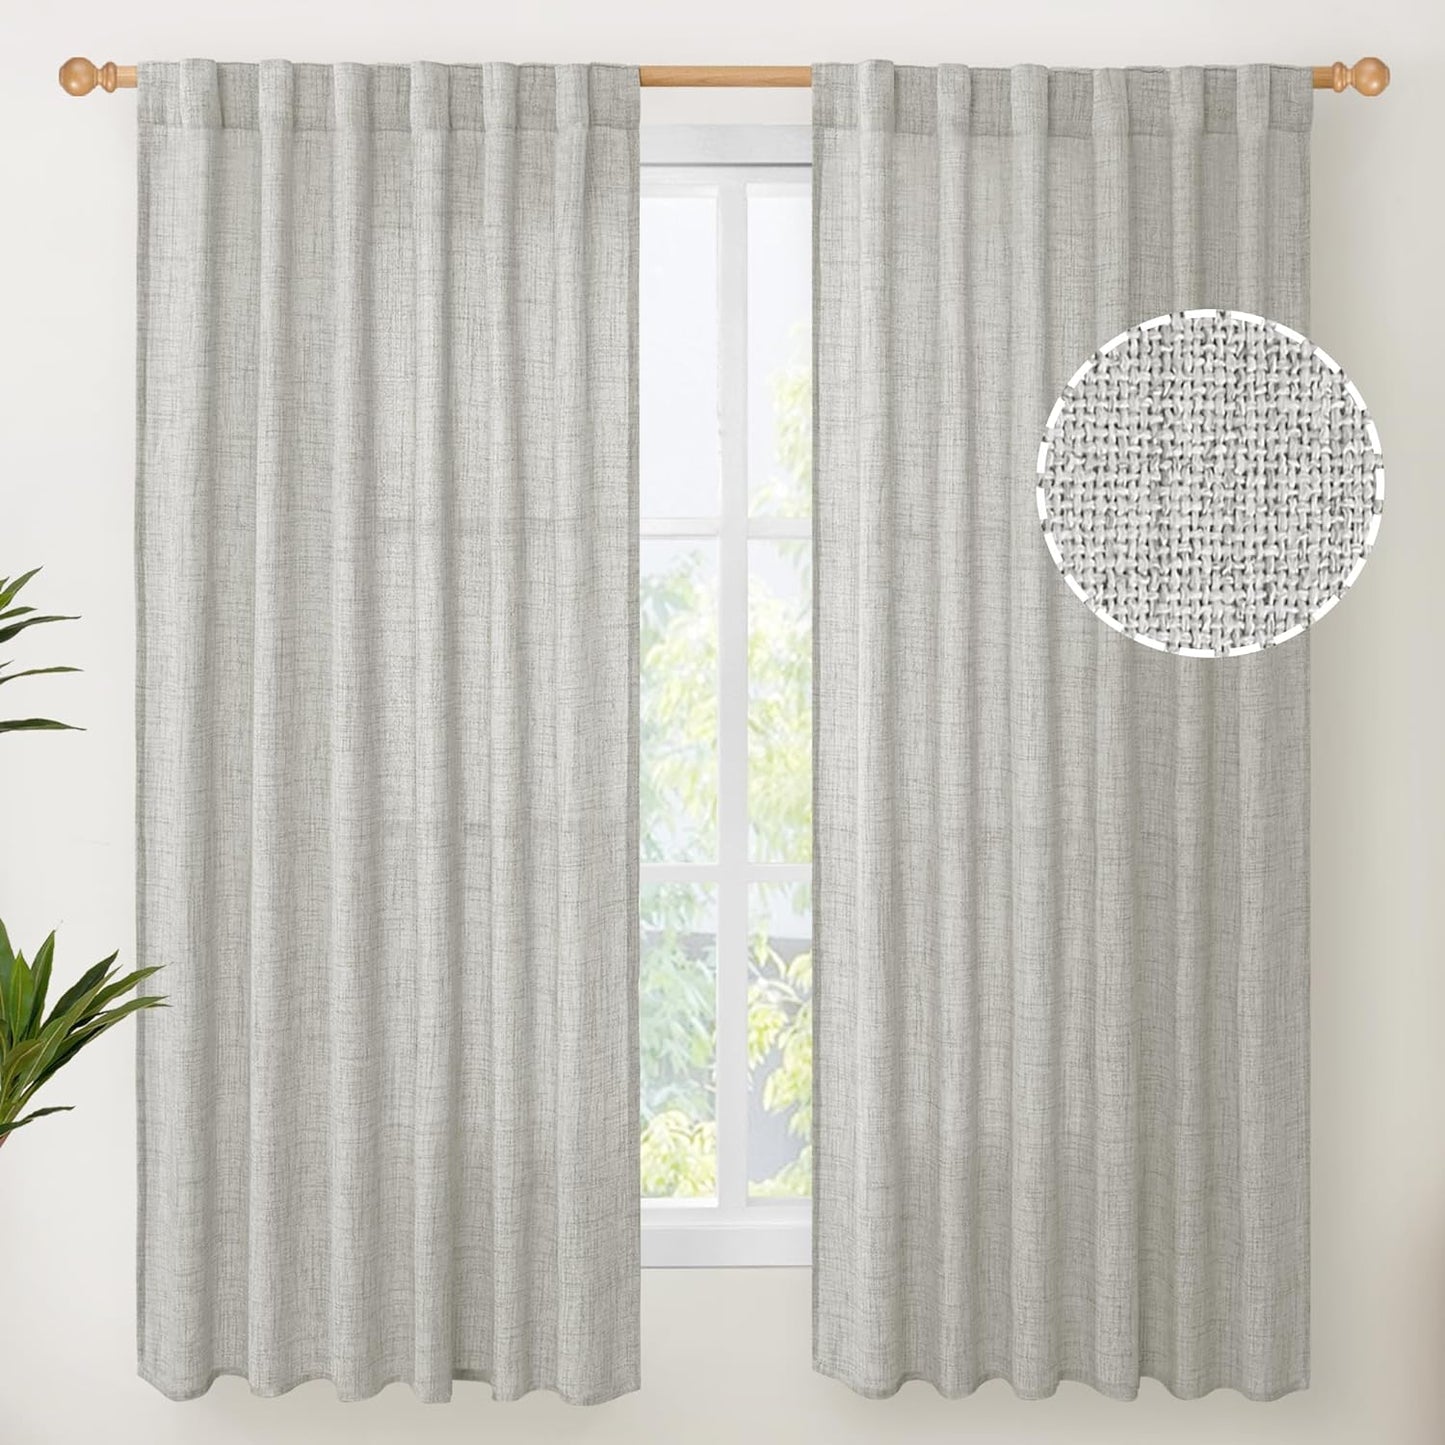 Youngstex Natural Linen Curtains 72 Inch Length 2 Panels for Living Room Light Filtering Textured Window Drapes for Bedroom Dining Office Back Tab Rod Pocket, 52 X 72 Inch  YoungsTex Light Grey 52W X 63L 